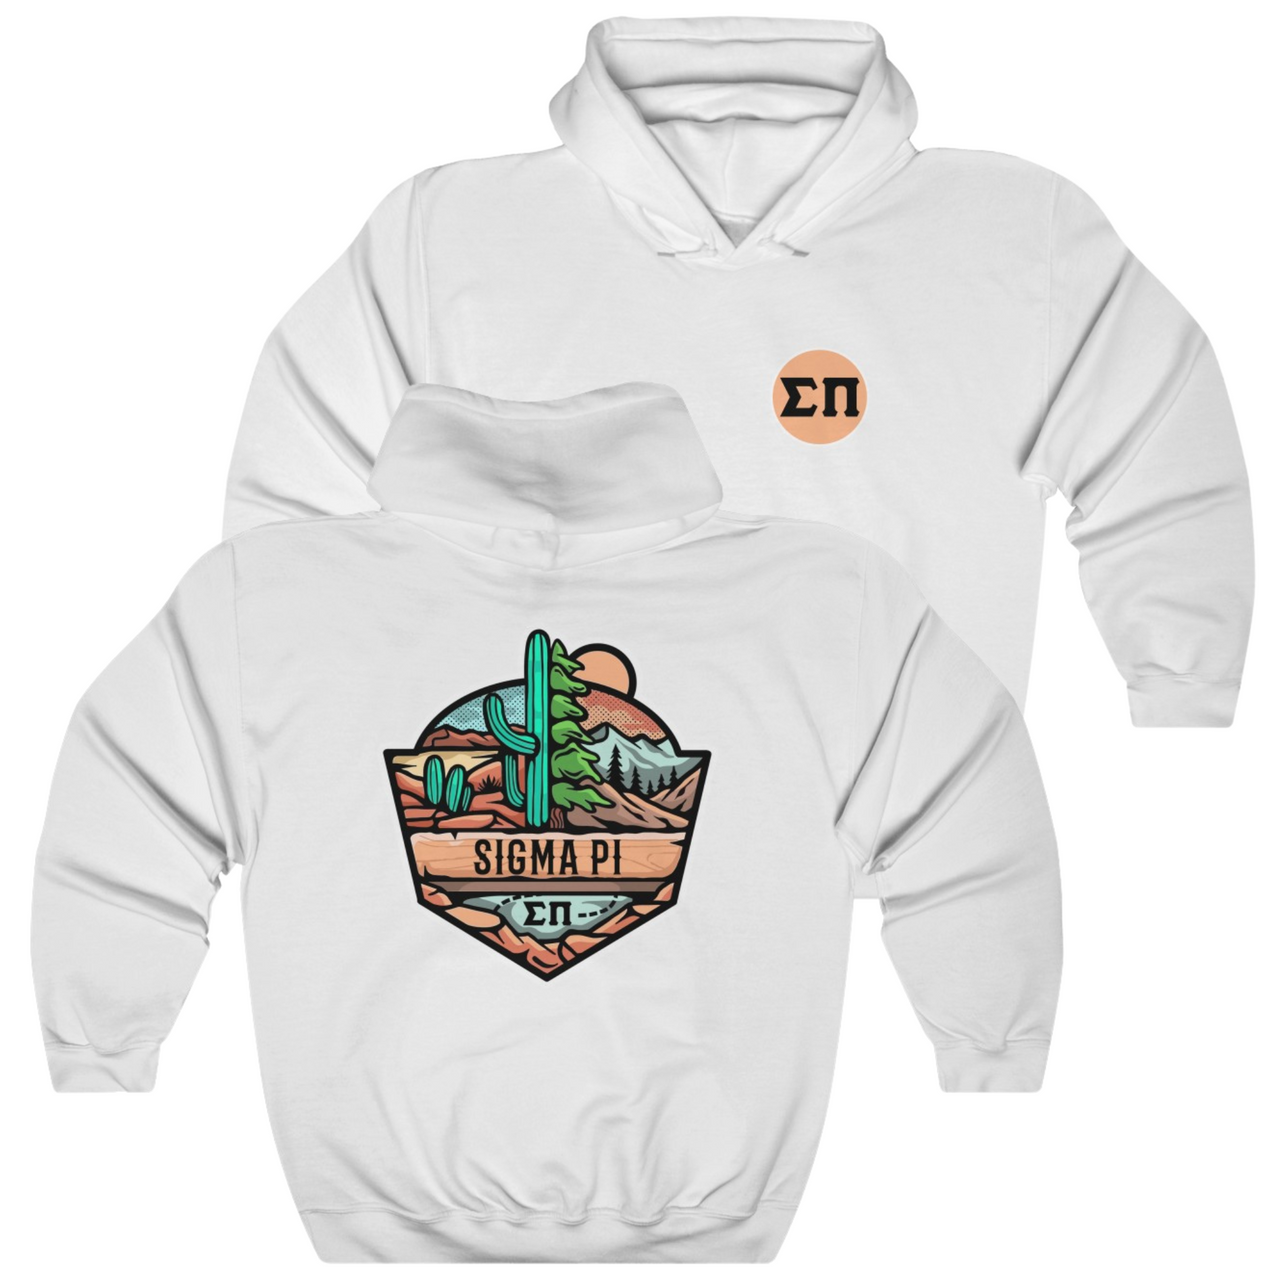 White Sigma Pi Graphic Hoodie | Desert Mountains | Sigma Pi Apparel and Merchandise